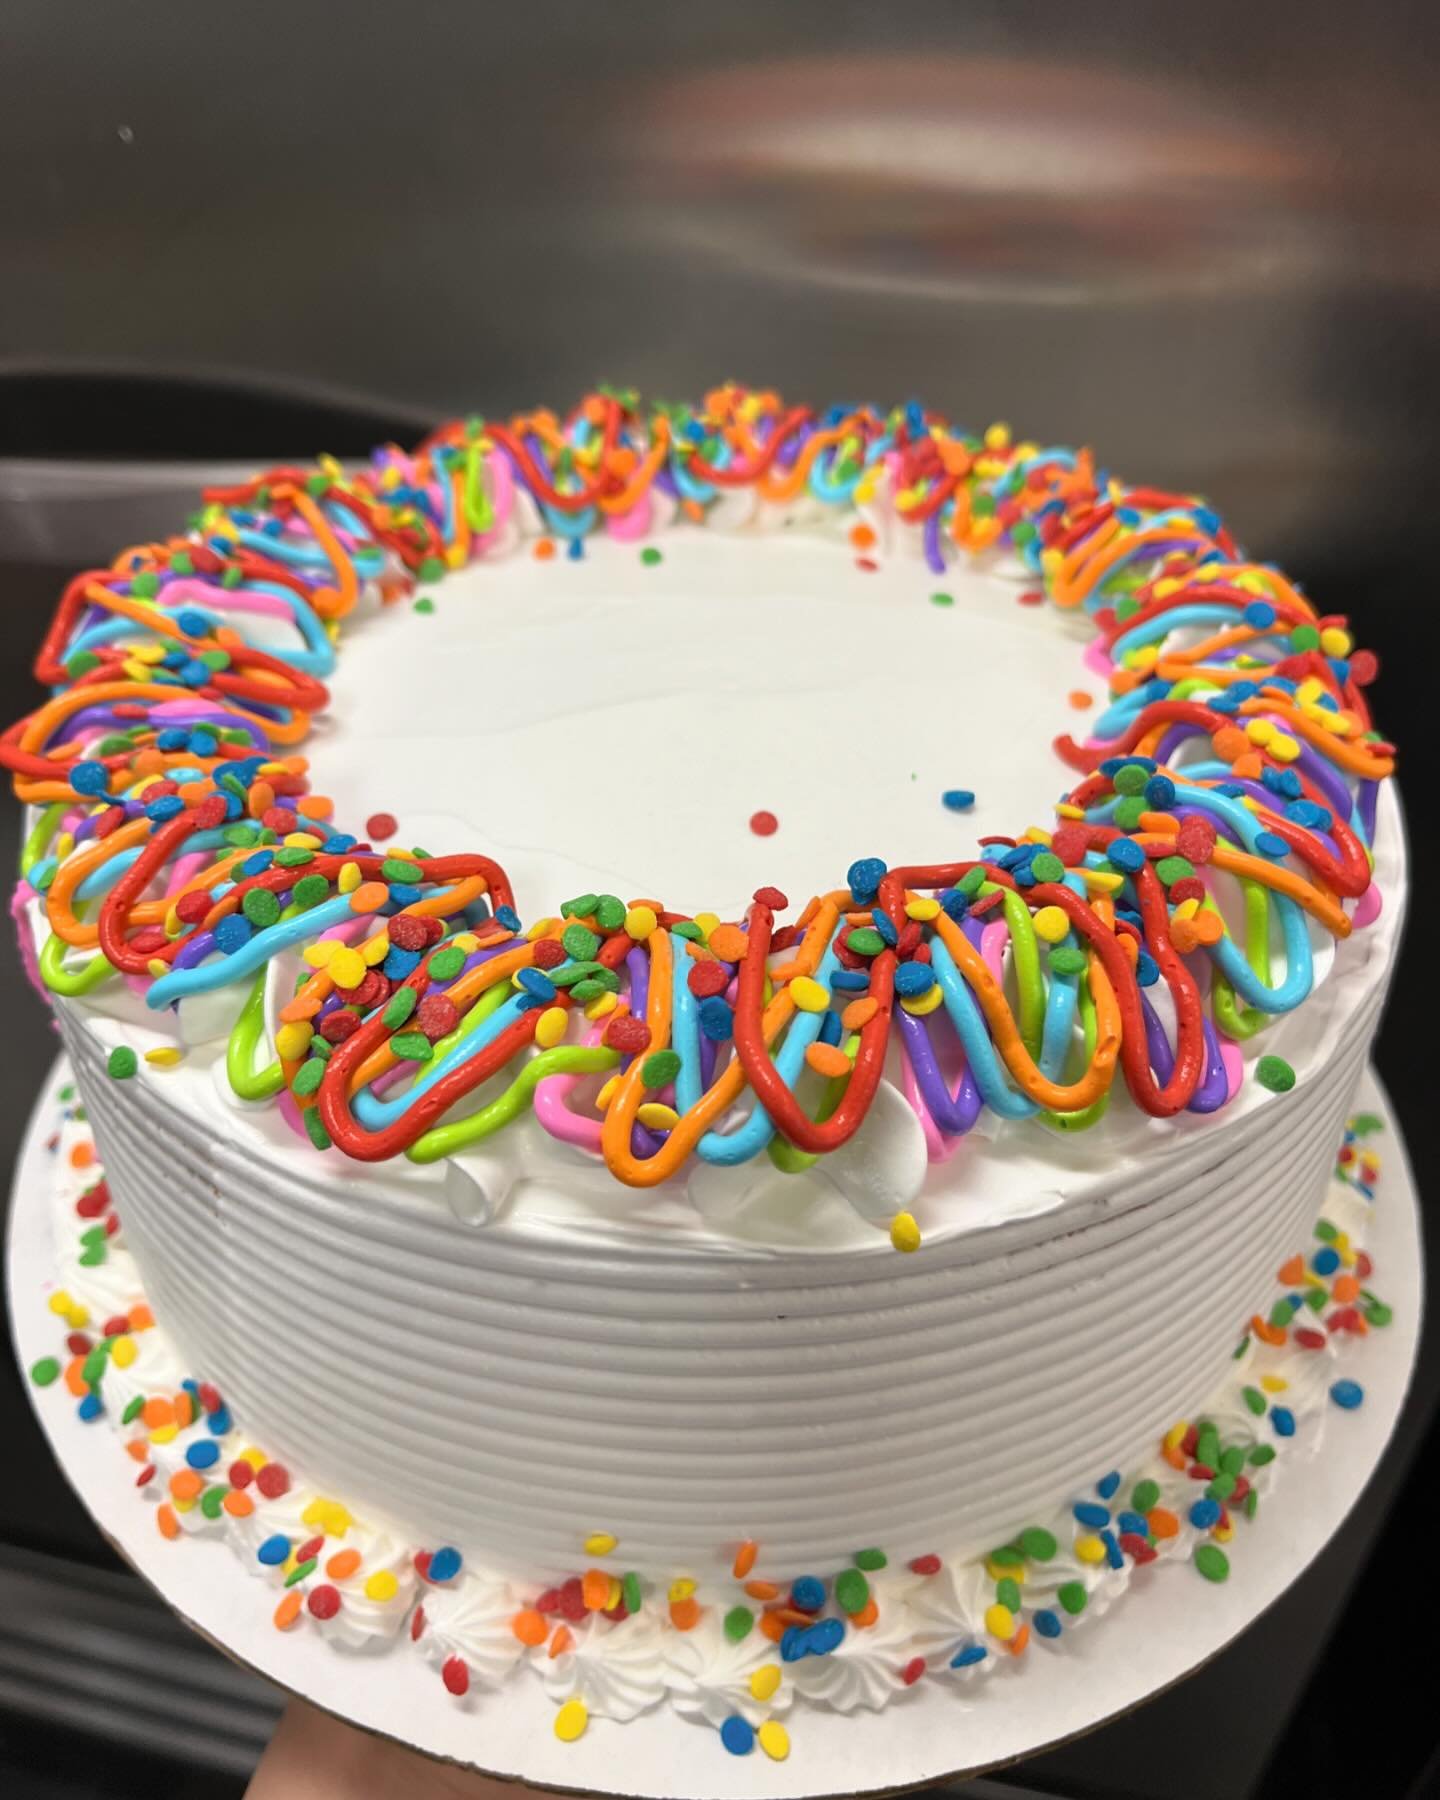 Got a celebration coming up? This ICE CREAM CAKE is ready for ya in our grab &lsquo;n go freezer.
⠀⠀⠀⠀⠀⠀⠀⠀⠀⠀⠀⠀⠀⠀⠀⠀⠀⠀
Come on by!
🌷Sun: Noon-9pm
🌷Mon-Thur: 1pm-9pm
🌷Fri: 1pm-10pm
🌷Sat: Noon-10pm
⠀⠀⠀⠀⠀⠀⠀⠀⠀⠀⠀⠀⠀⠀⠀⠀⠀⠀ 
⠀⠀⠀⠀⠀⠀⠀⠀⠀⠀⠀⠀⠀⠀⠀⠀⠀⠀
⠀⠀⠀⠀⠀⠀⠀⠀⠀⠀⠀⠀⠀